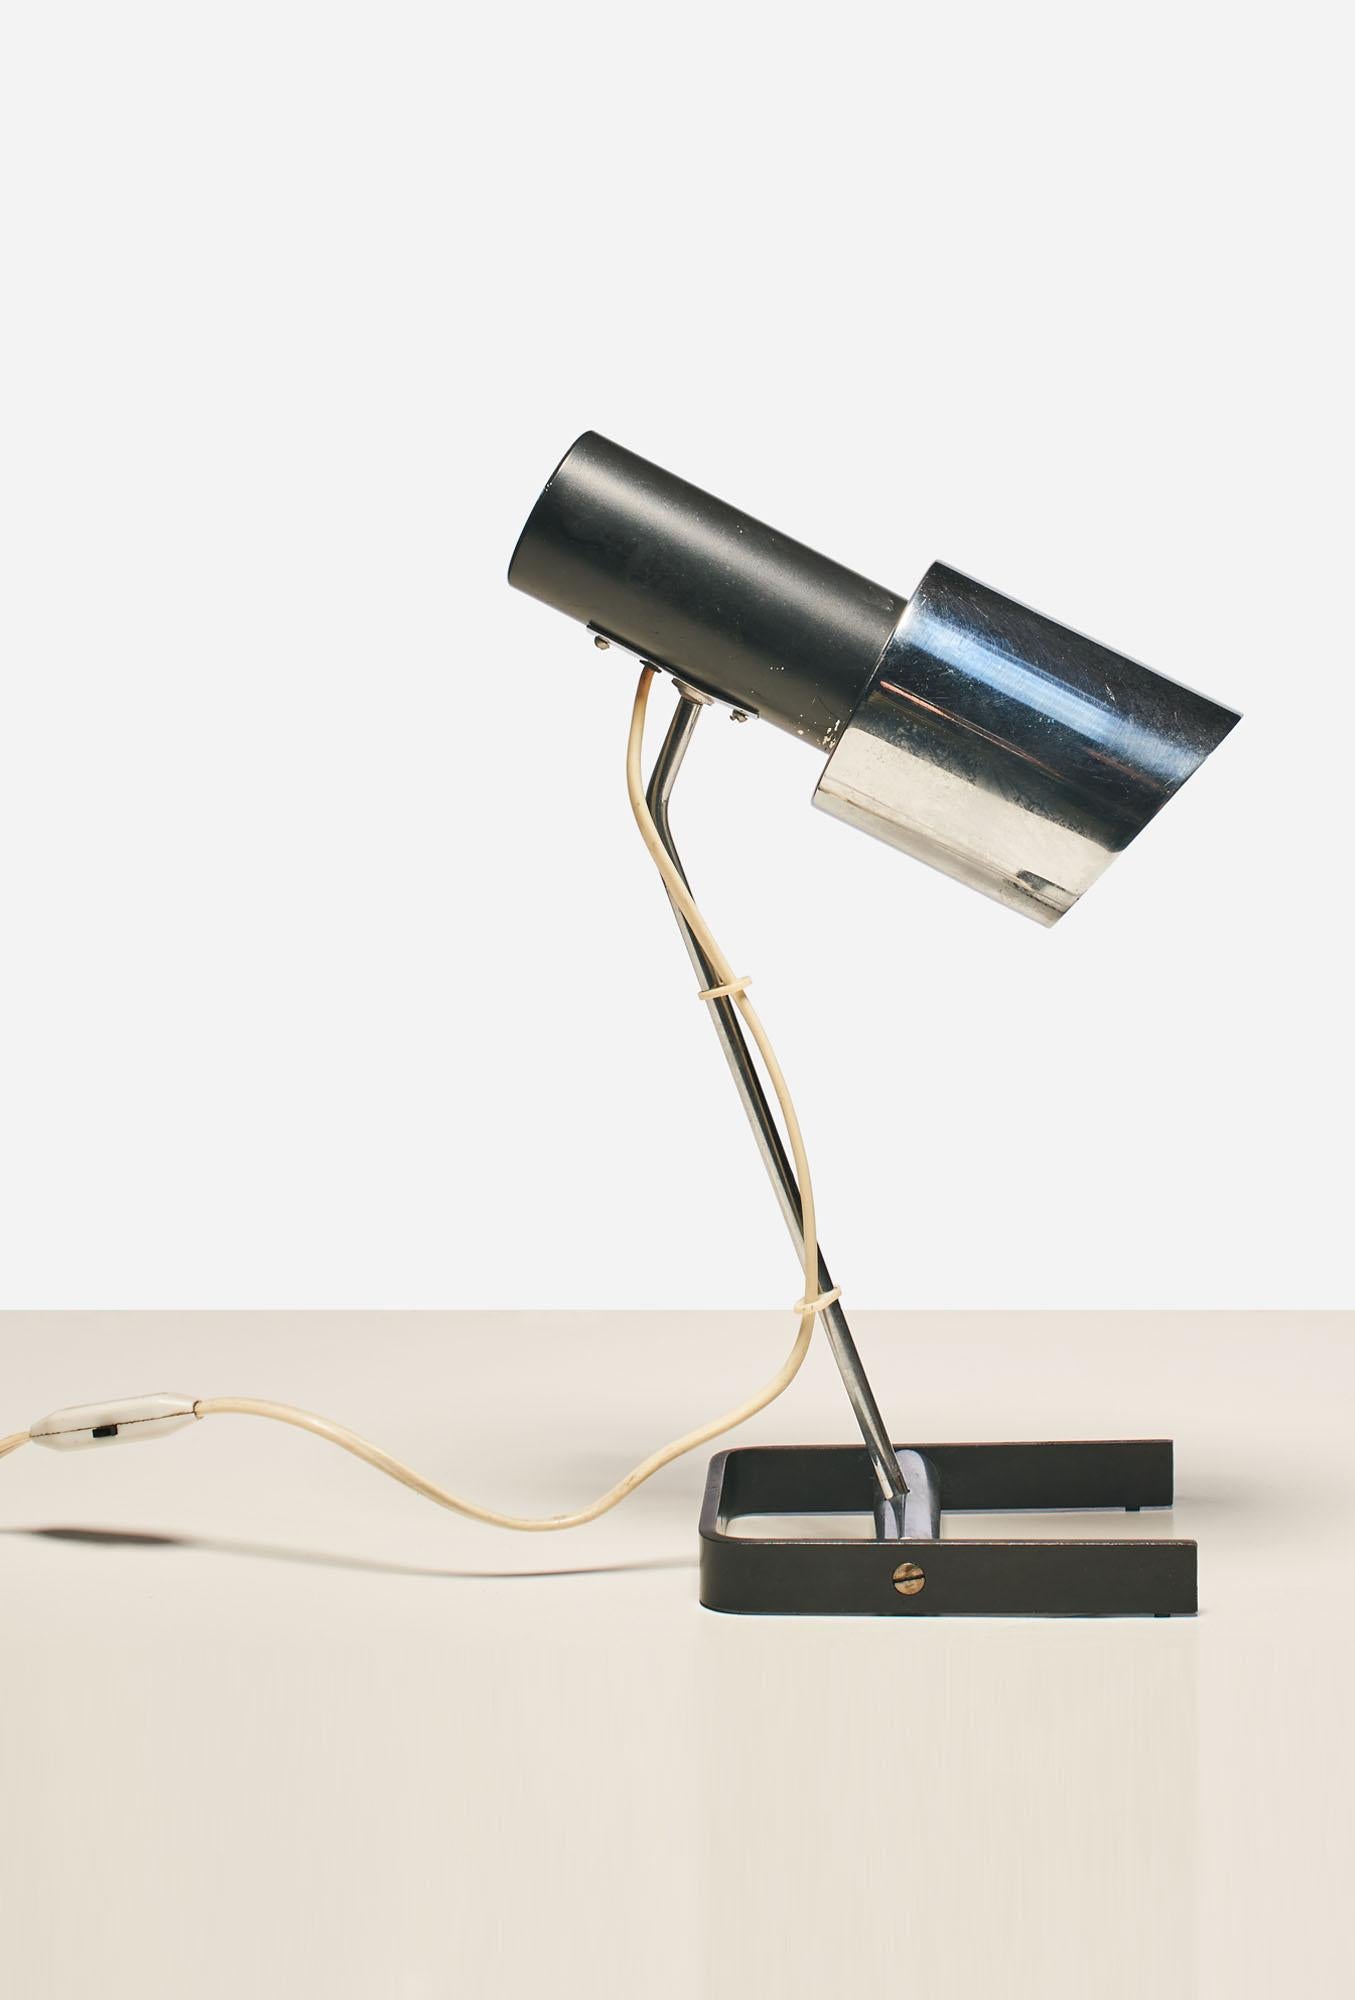 Midcentury table lamp by Kovona, type N55 in black coated metal and chrome, 1960s.
Adjustable shade. Original condition.